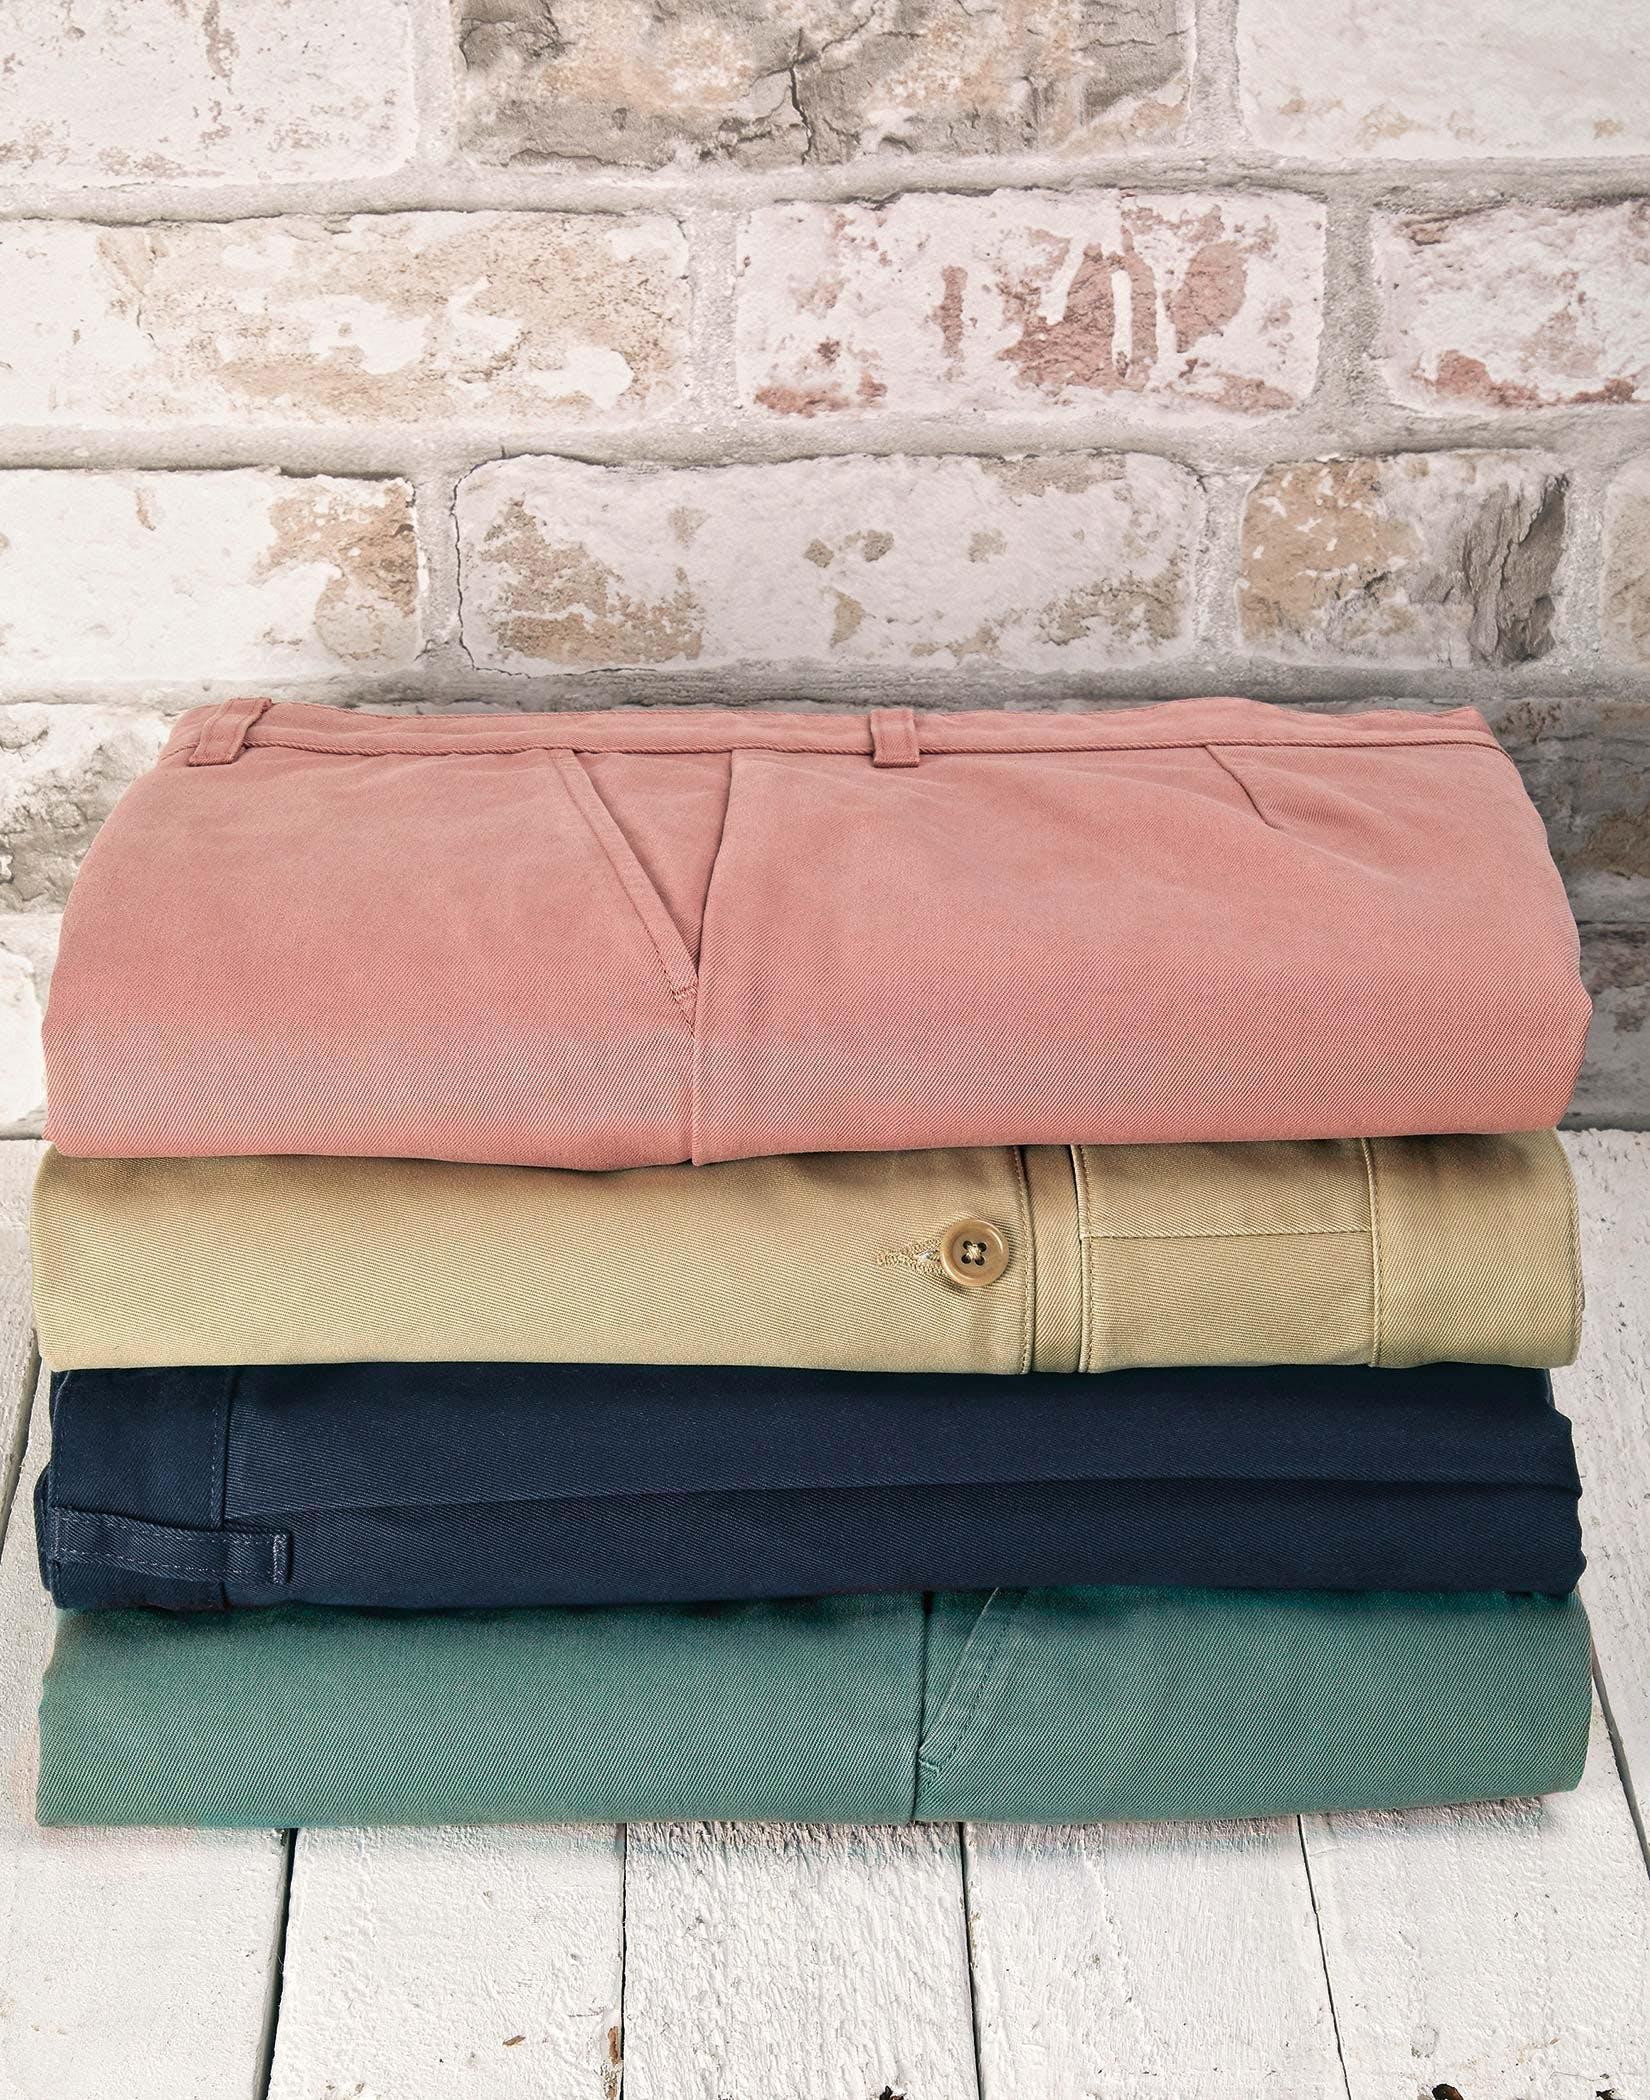 Pleated Front Chinos